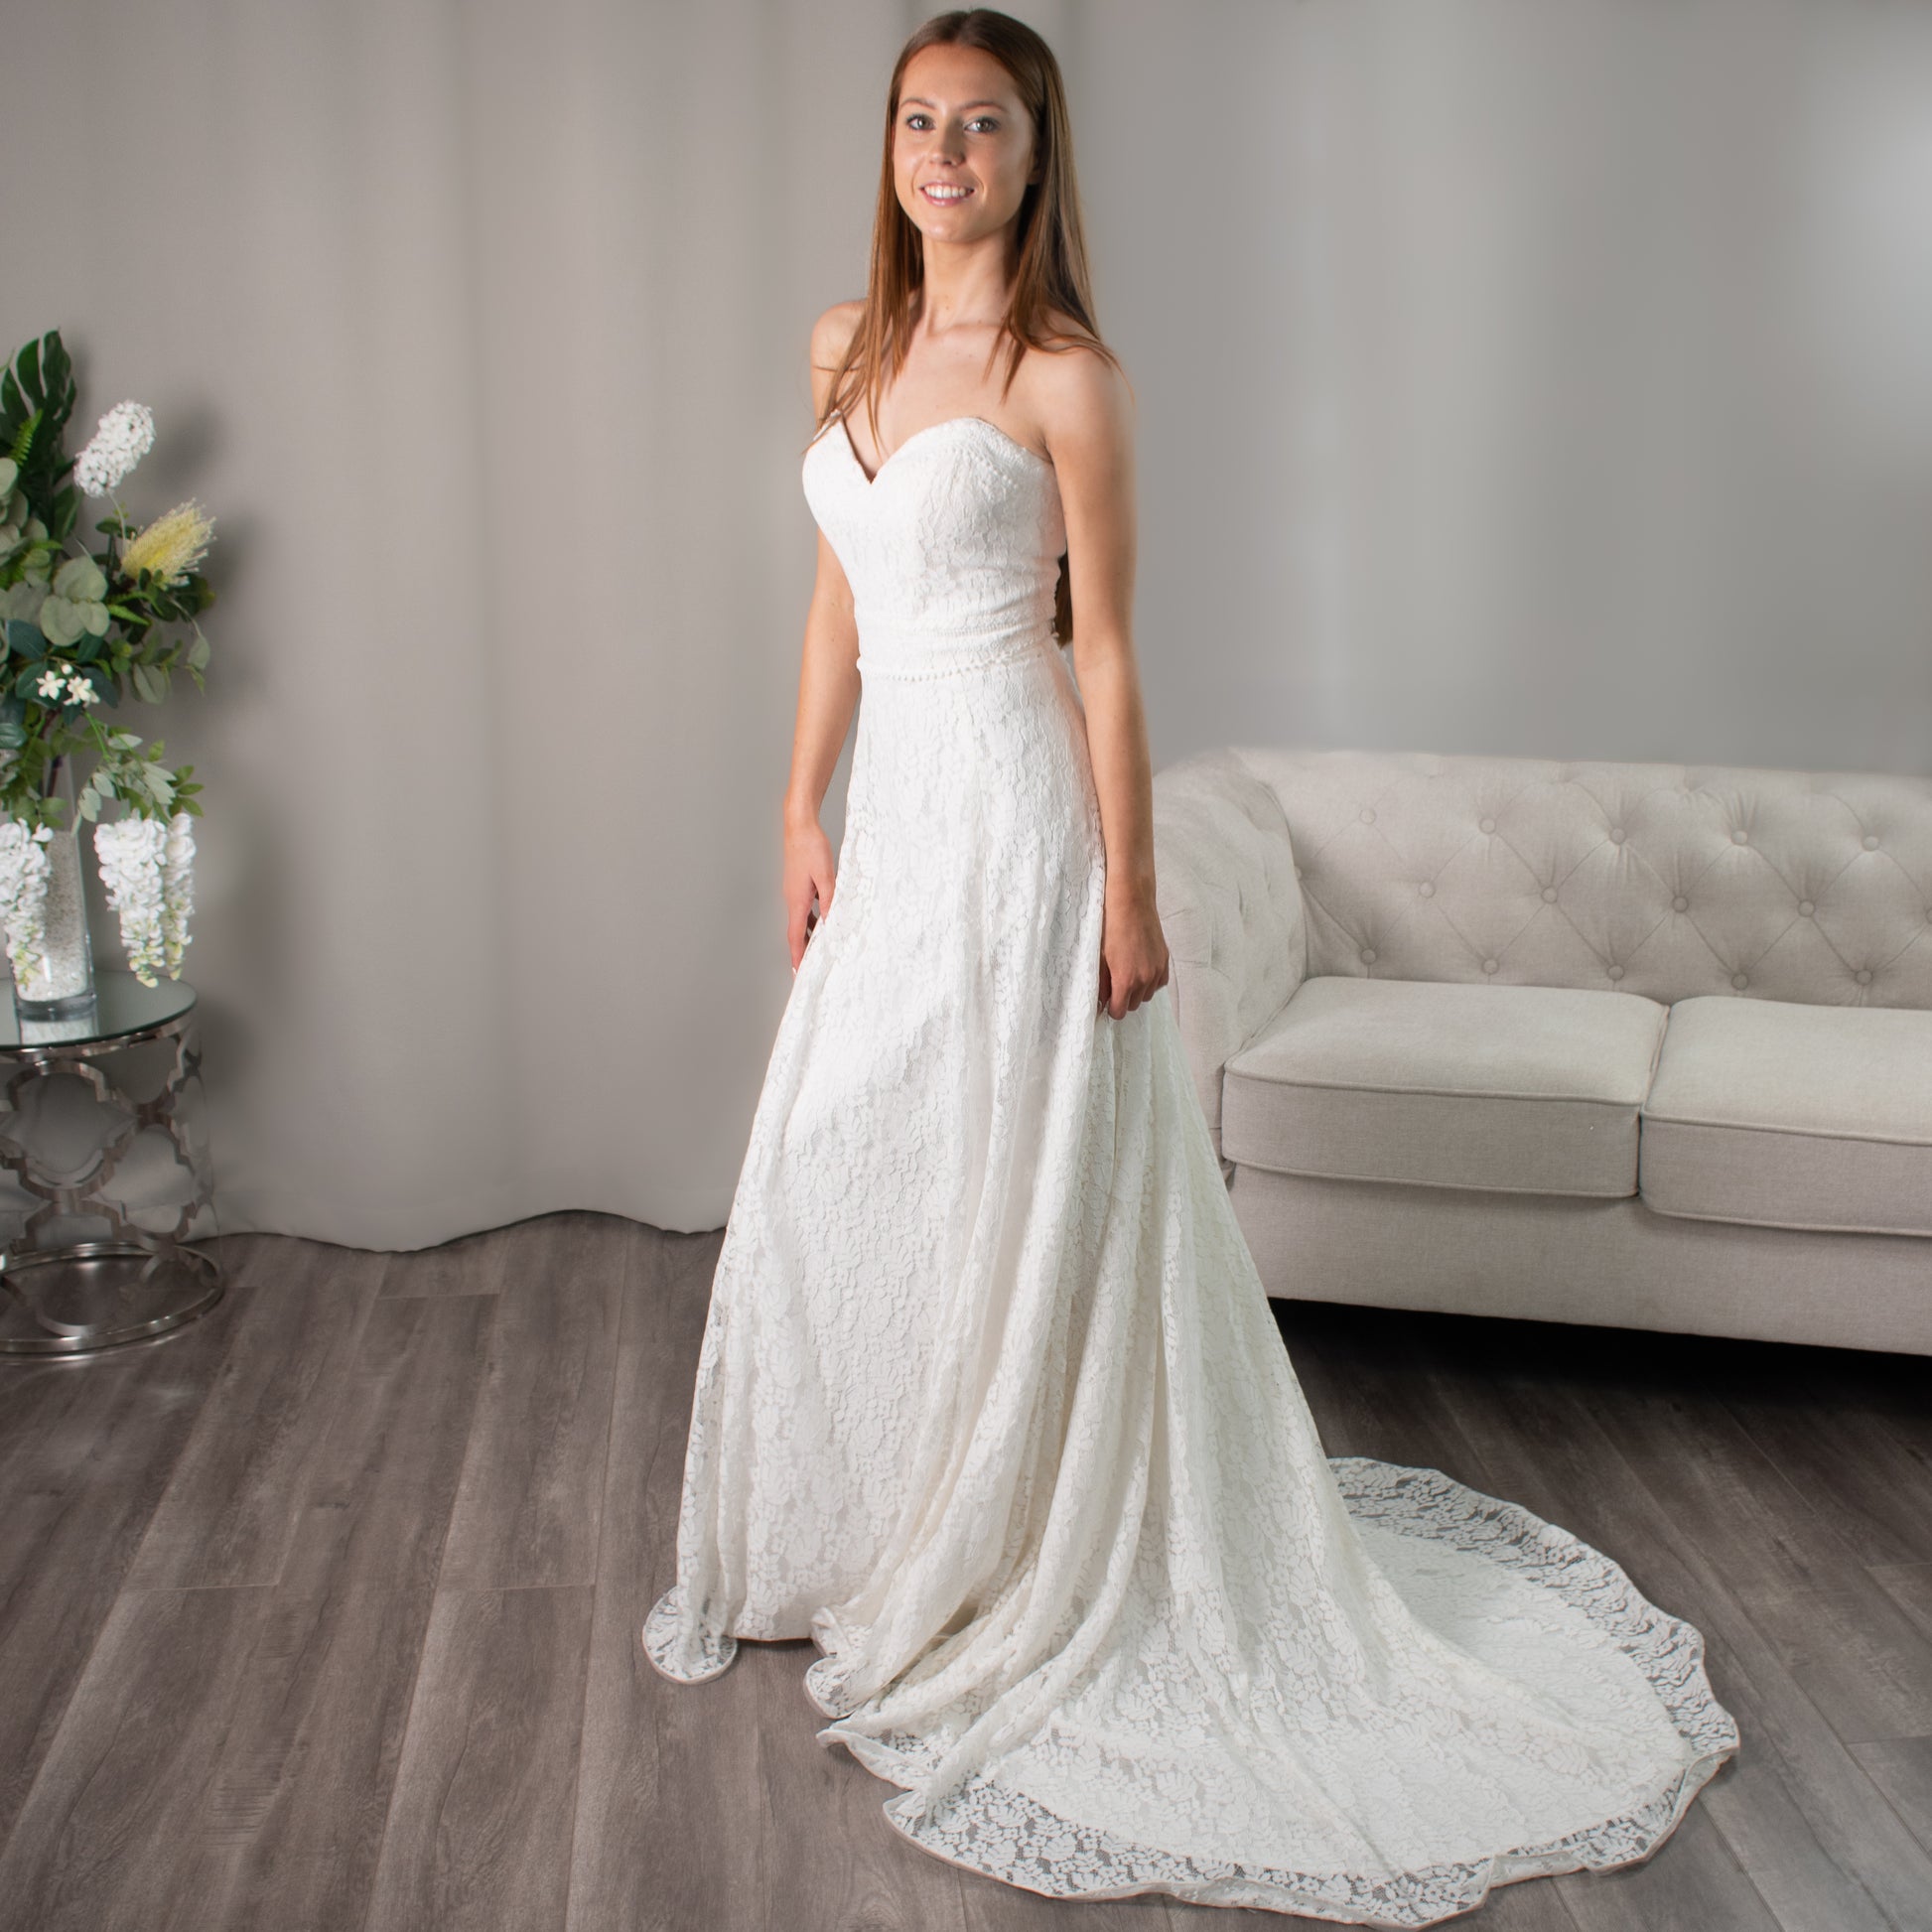 Ellie Strapless Boho Wedding Dress by Divine Bridal - Lace design with sweetheart neckline and fit n flare mermaid silhouette.